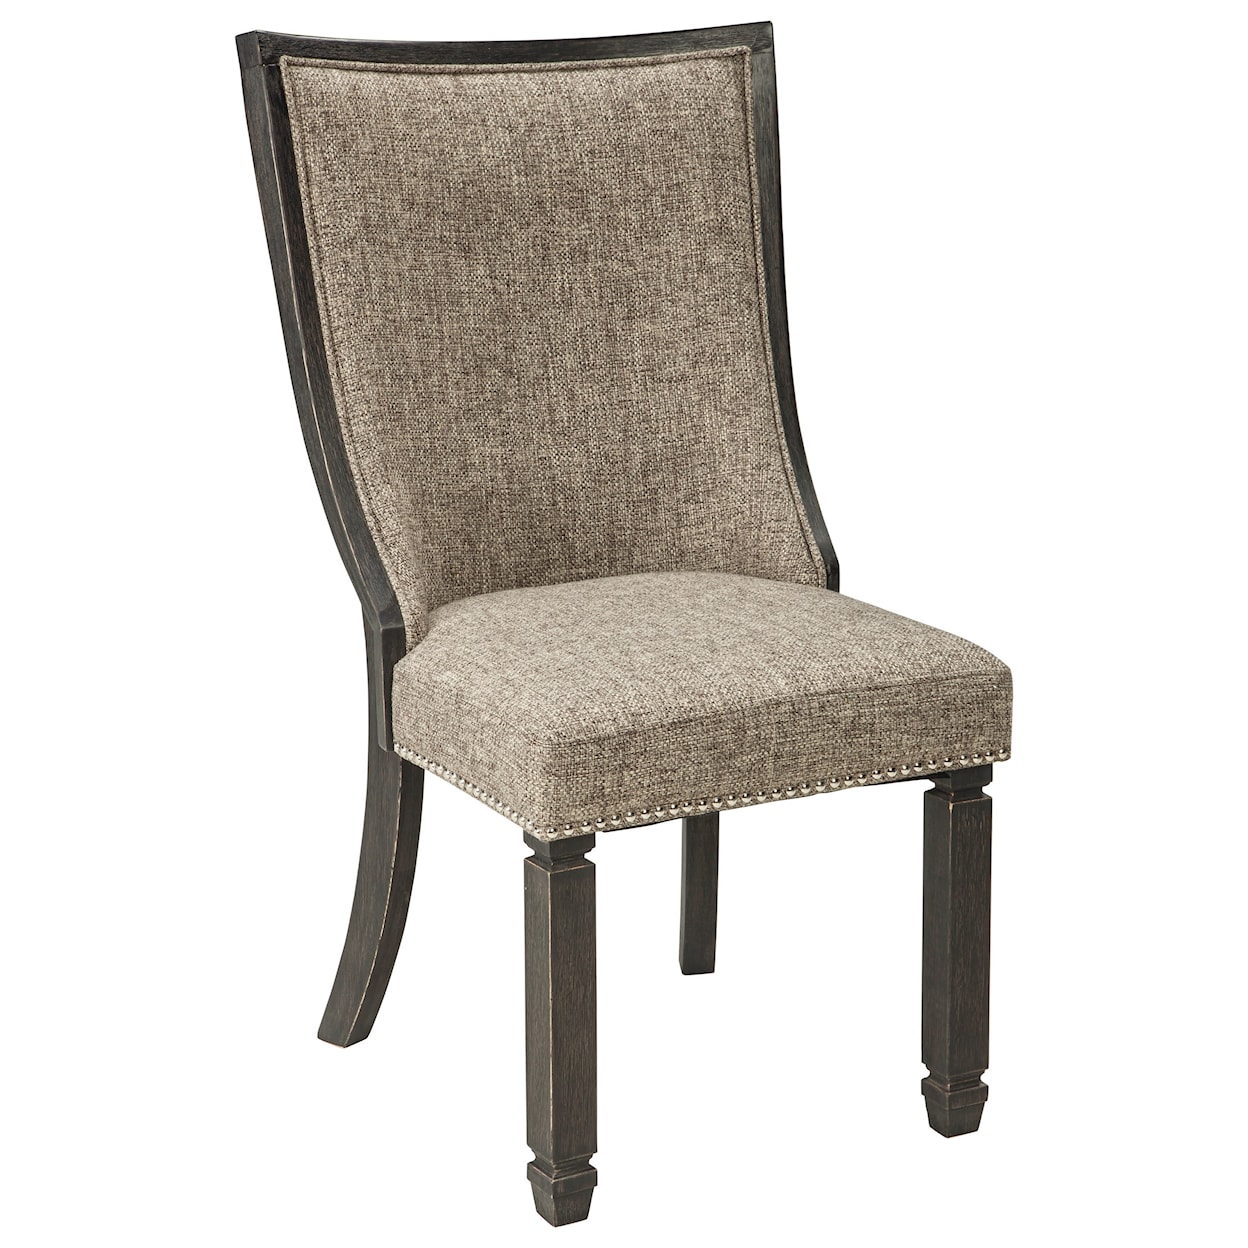 Signature Design by Ashley Tyler Creek Upholstered Side Chair